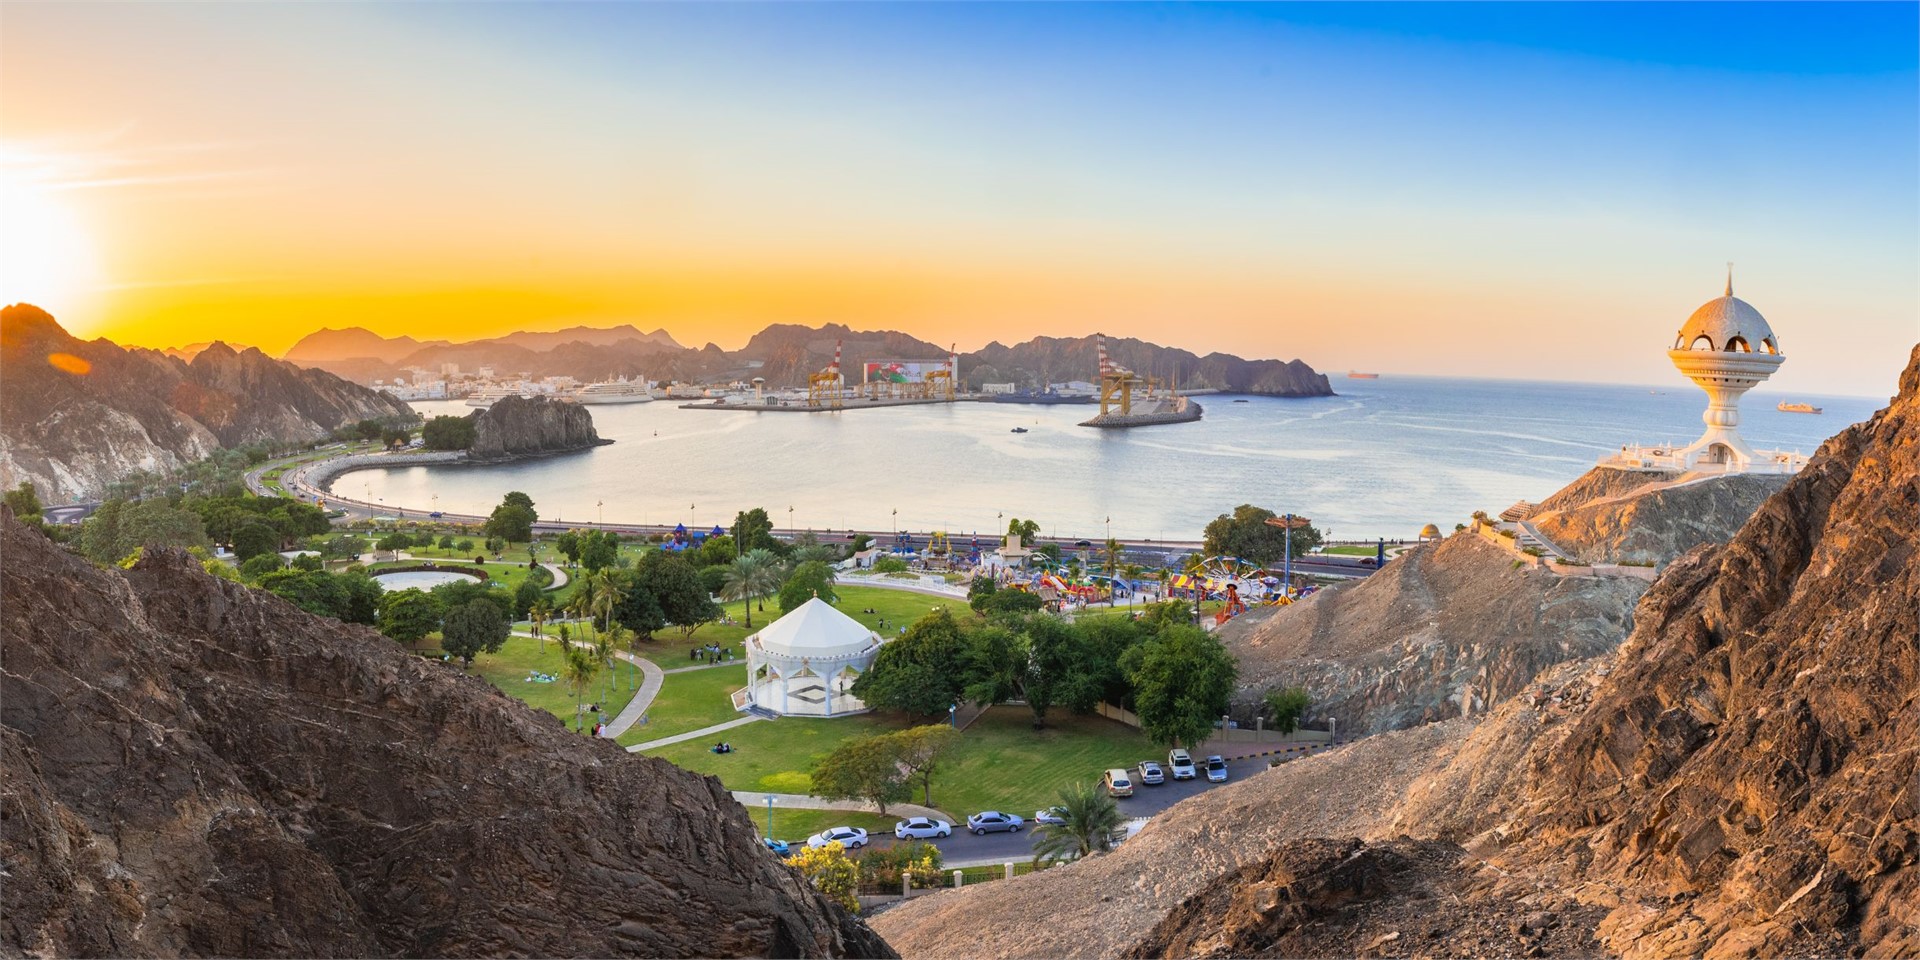 Hotels and accommodation in Muscat, Oman